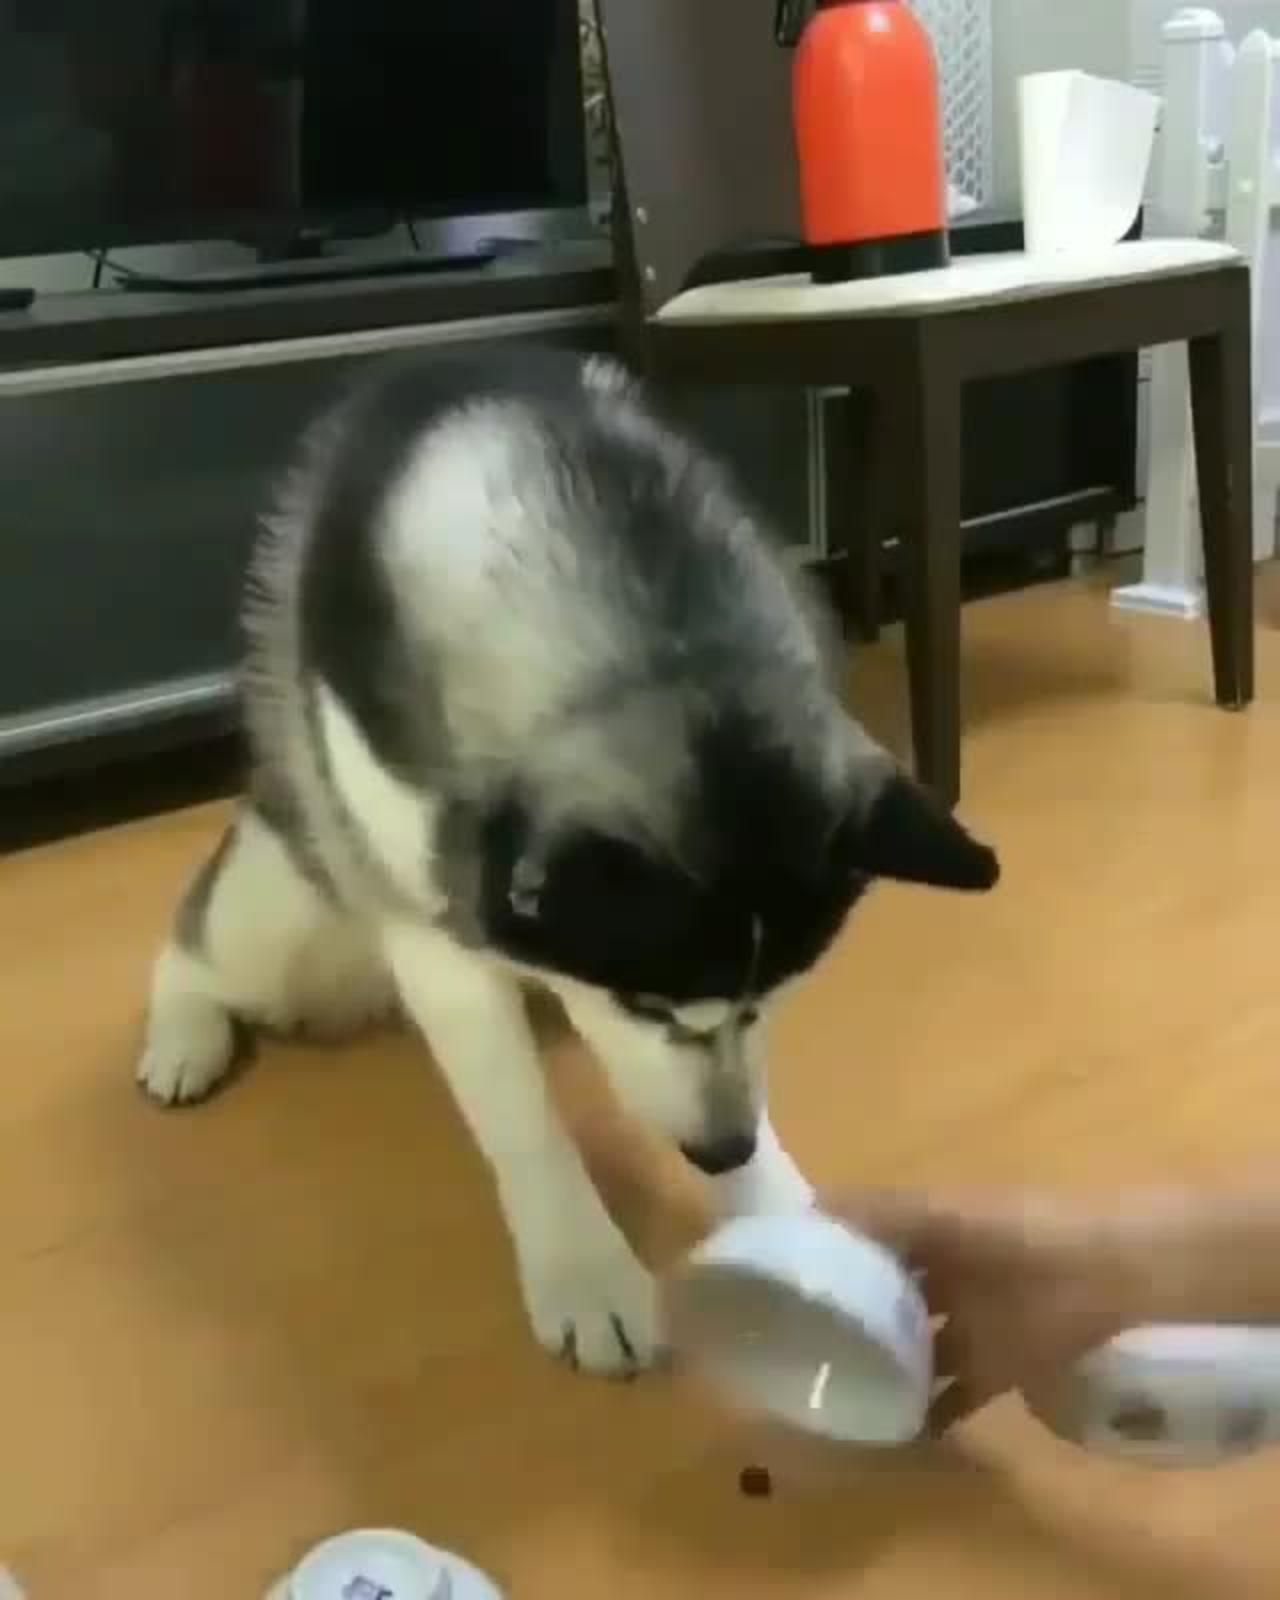 Clever and cute dog